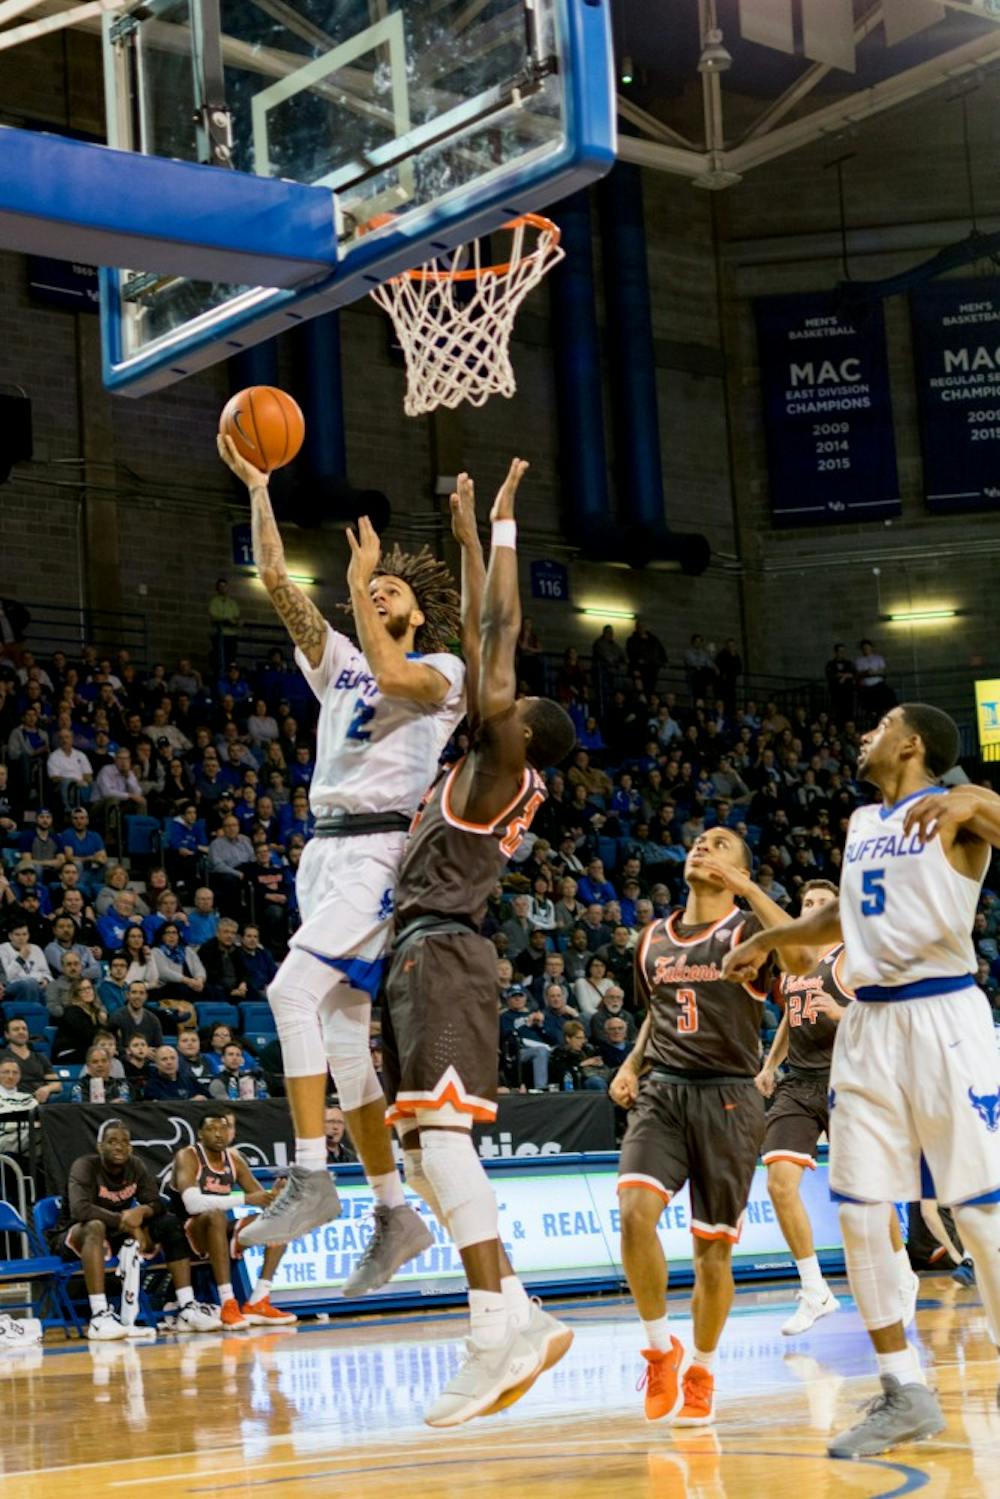 <p>Junior guard Jeremy Harris attempts to make a layup. Harris had a strong performance in the Bulls’ recent 84-81 loss to the Miami (OH) Redhawks.&nbsp;</p>